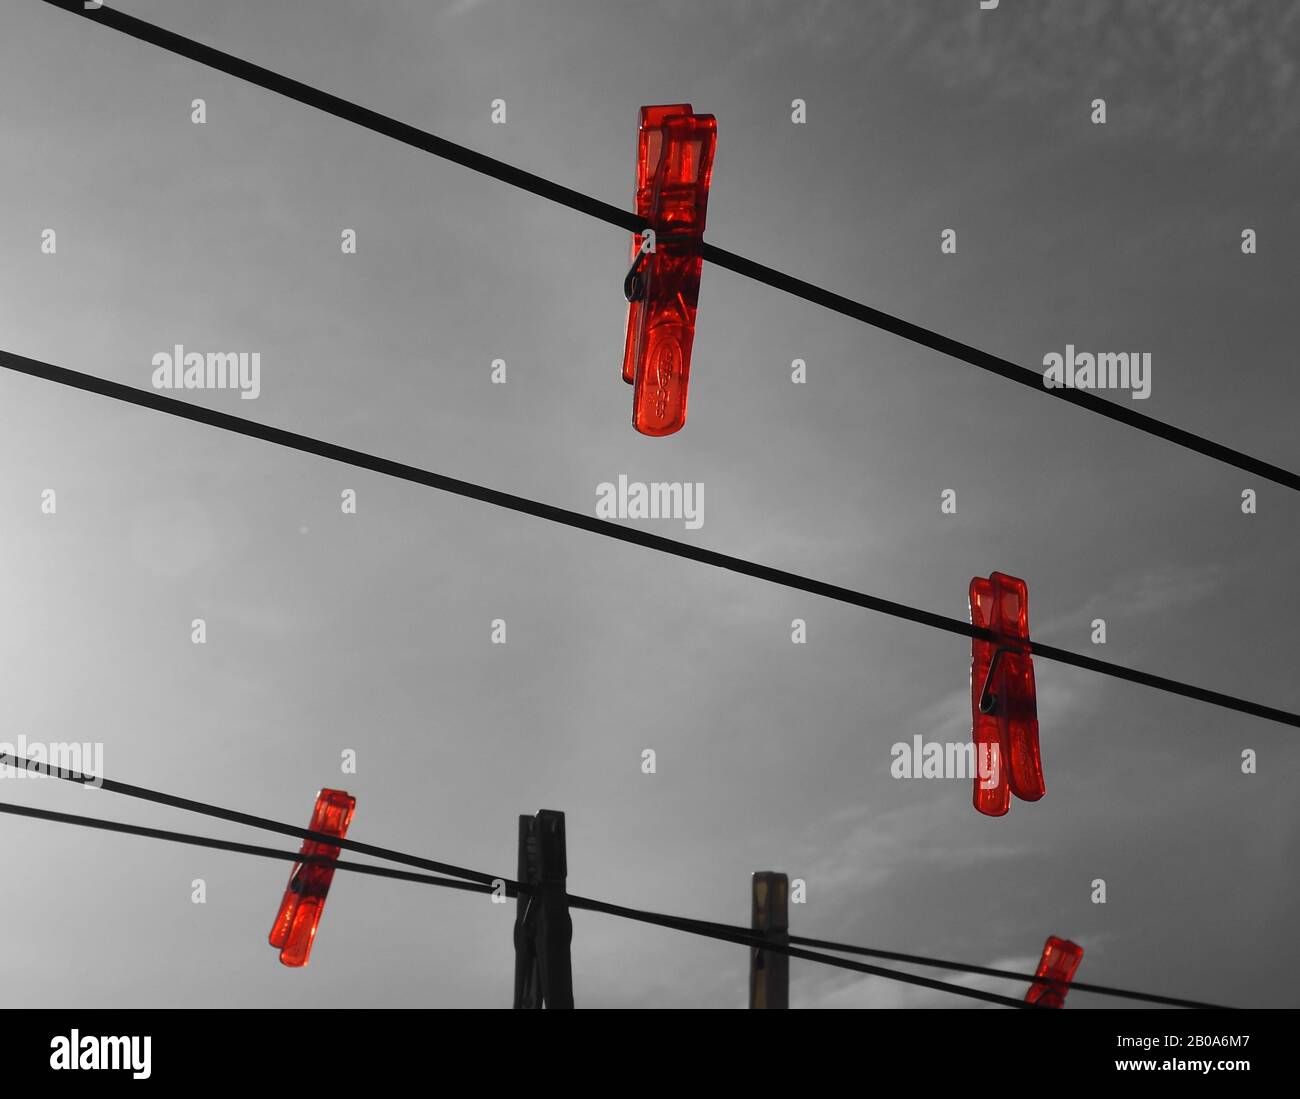 Bright red plastic pegs on a clothes line against a grey sky Stock Photo